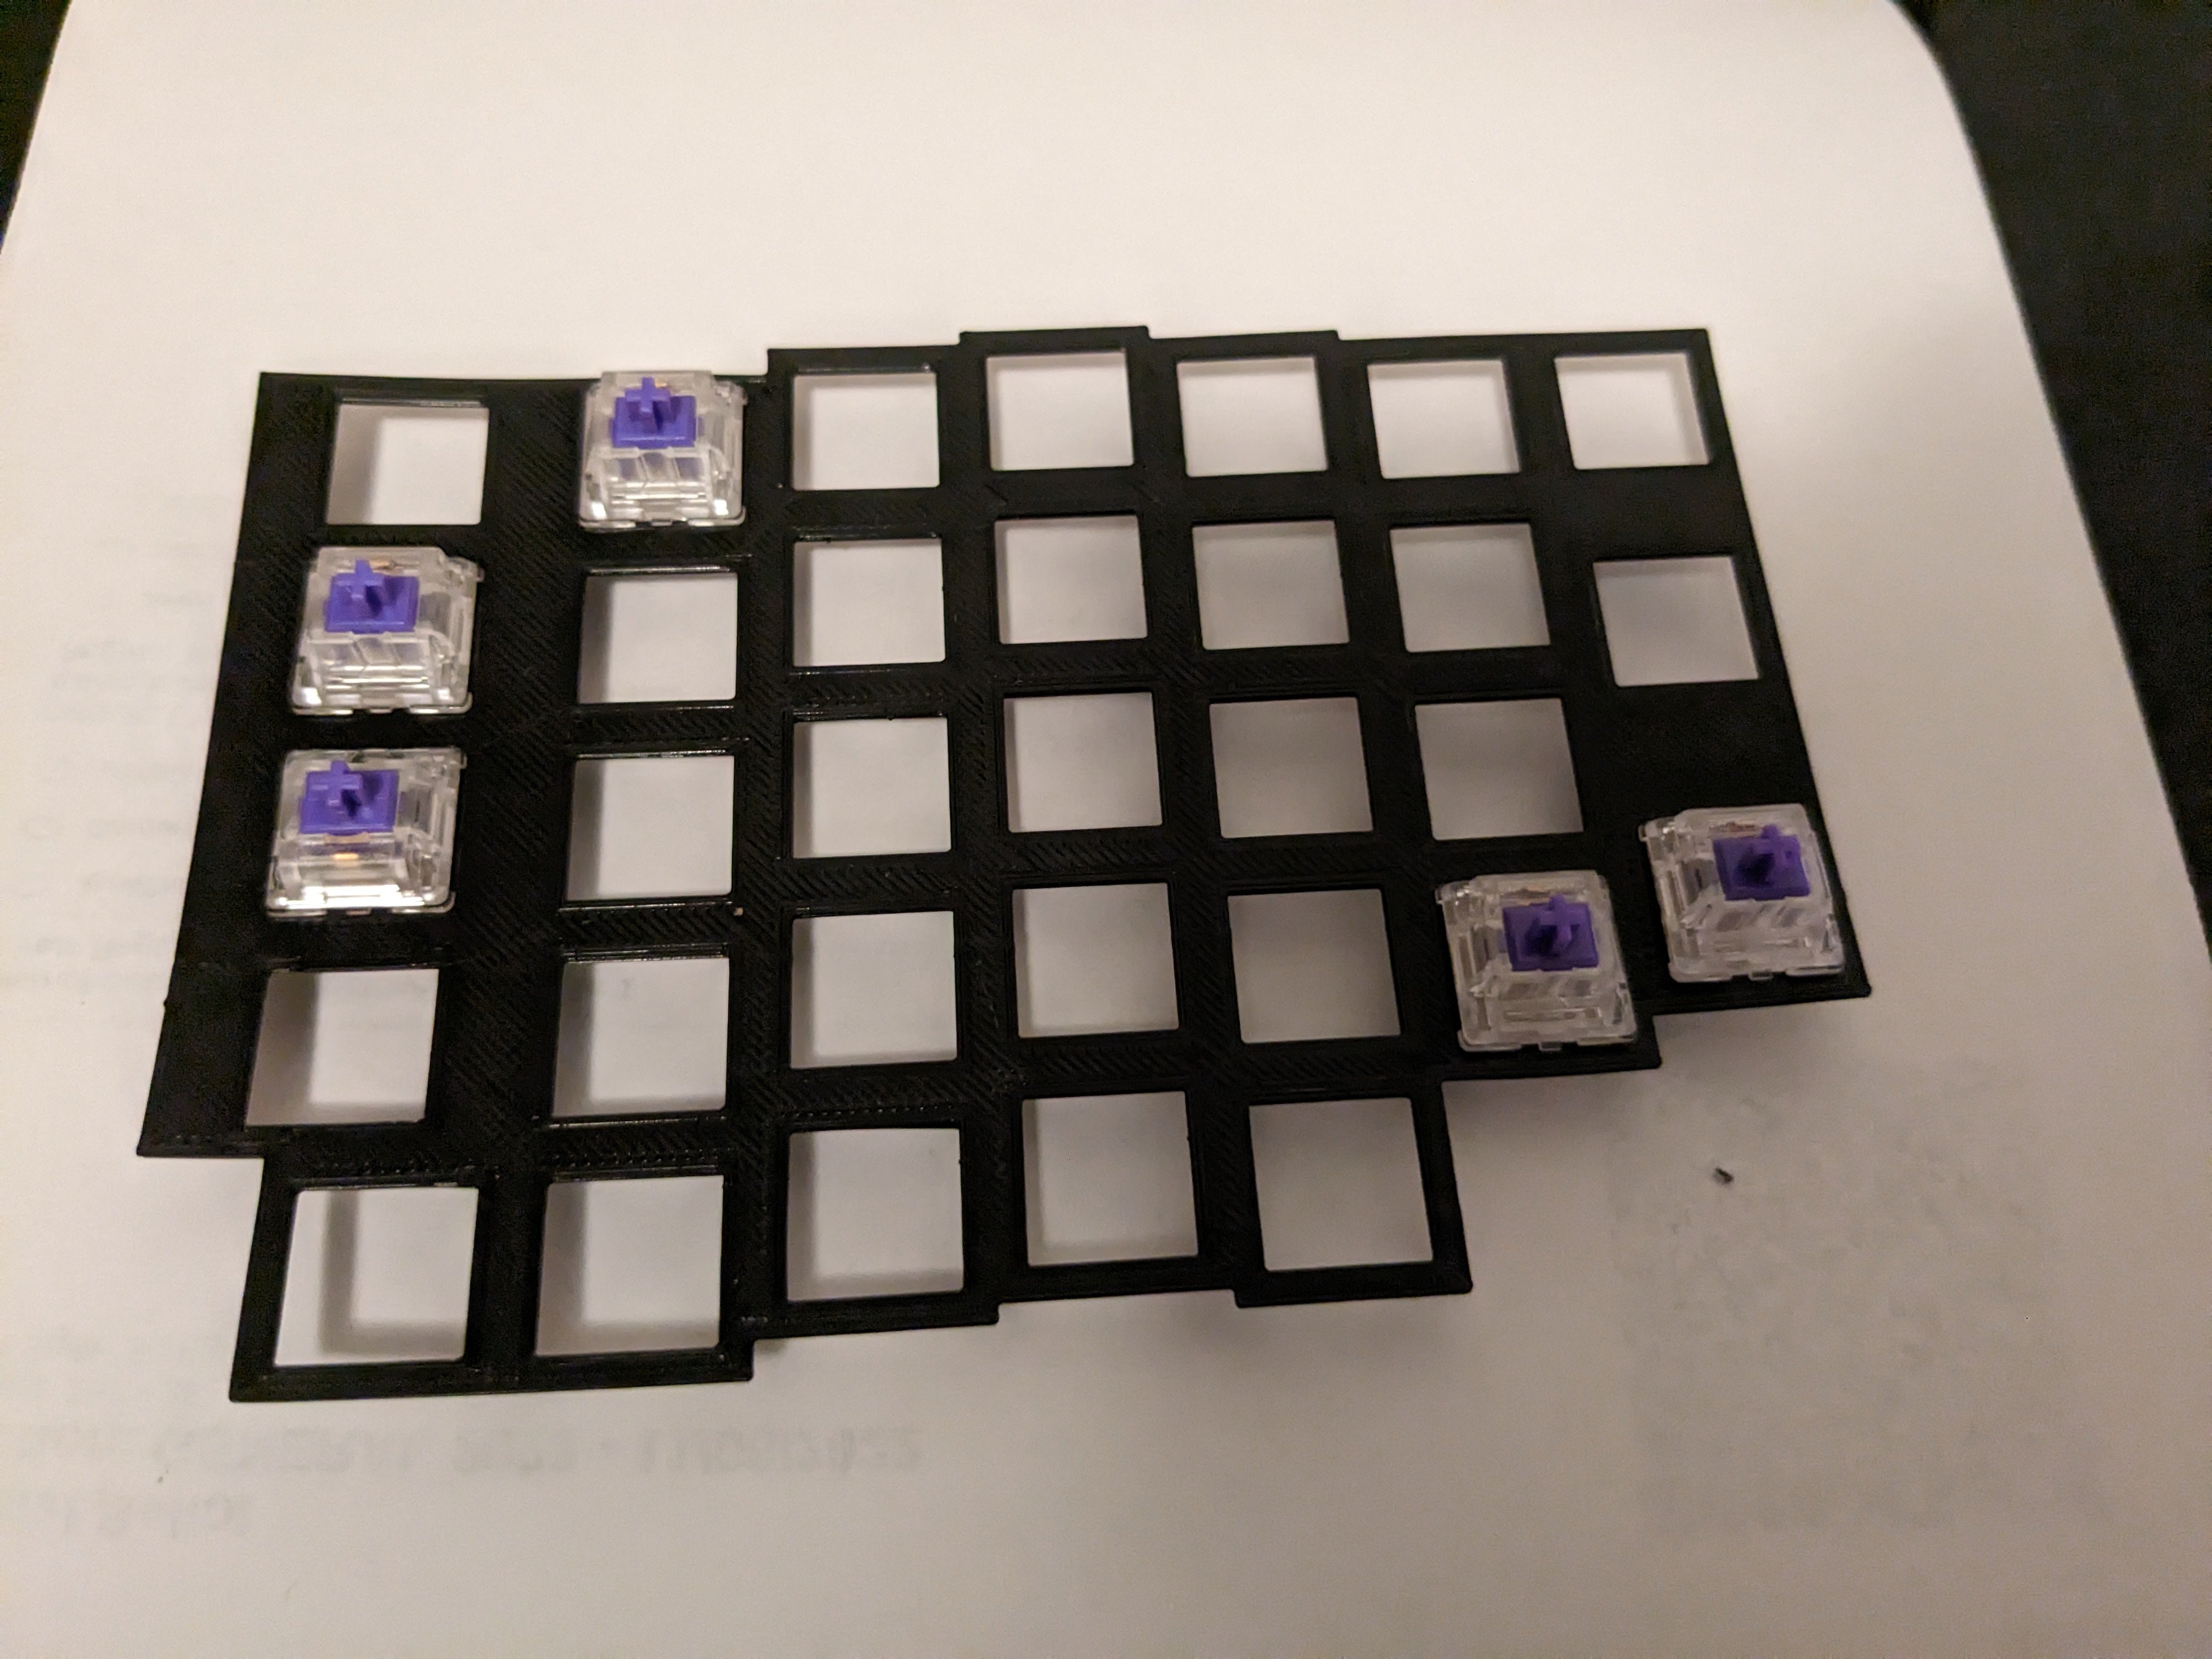 white keycap outlines, a green grid, and black case walls around it